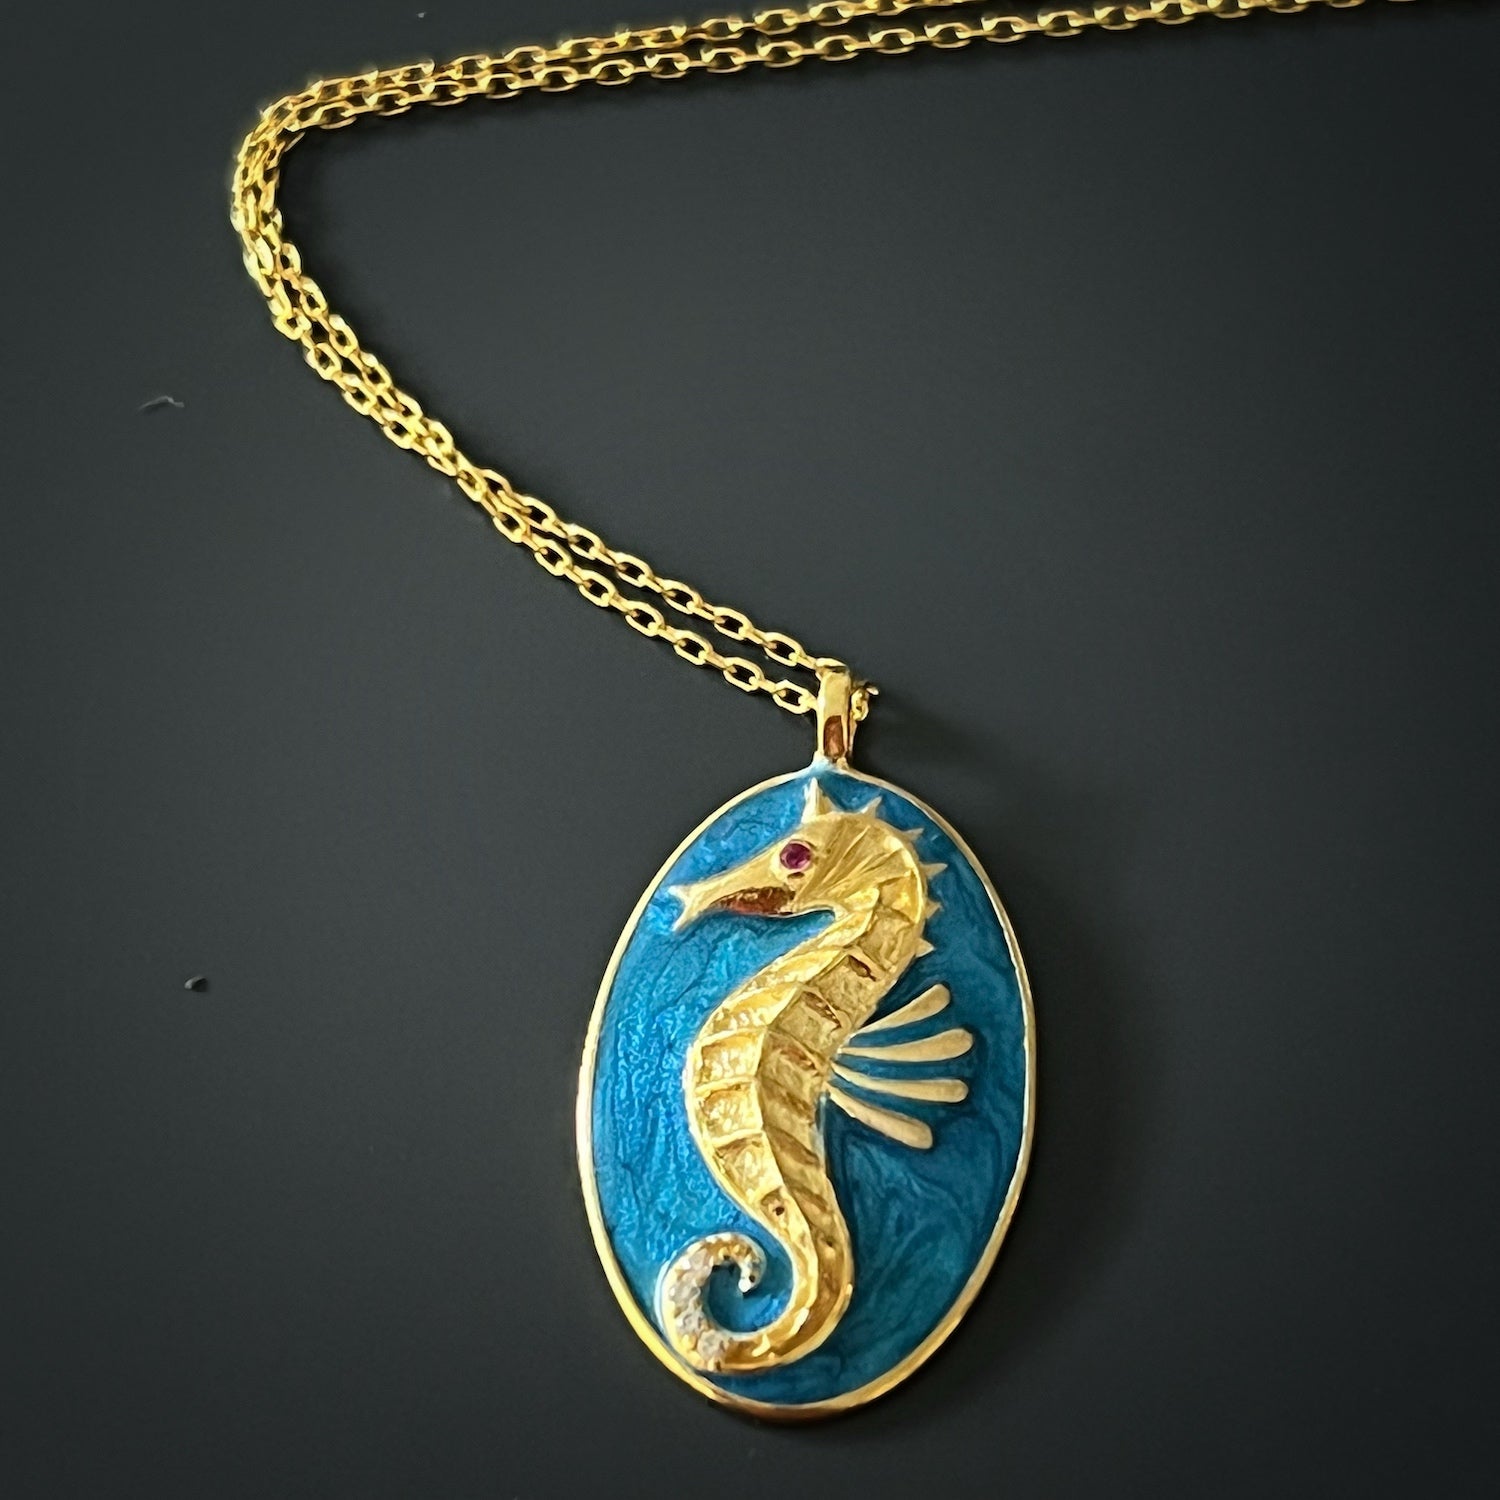 A detailed shot of the Spirit Animal Blue Seahorse Necklace, highlighting the unique blue enamel design and the delicate features of the seahorse pendant.